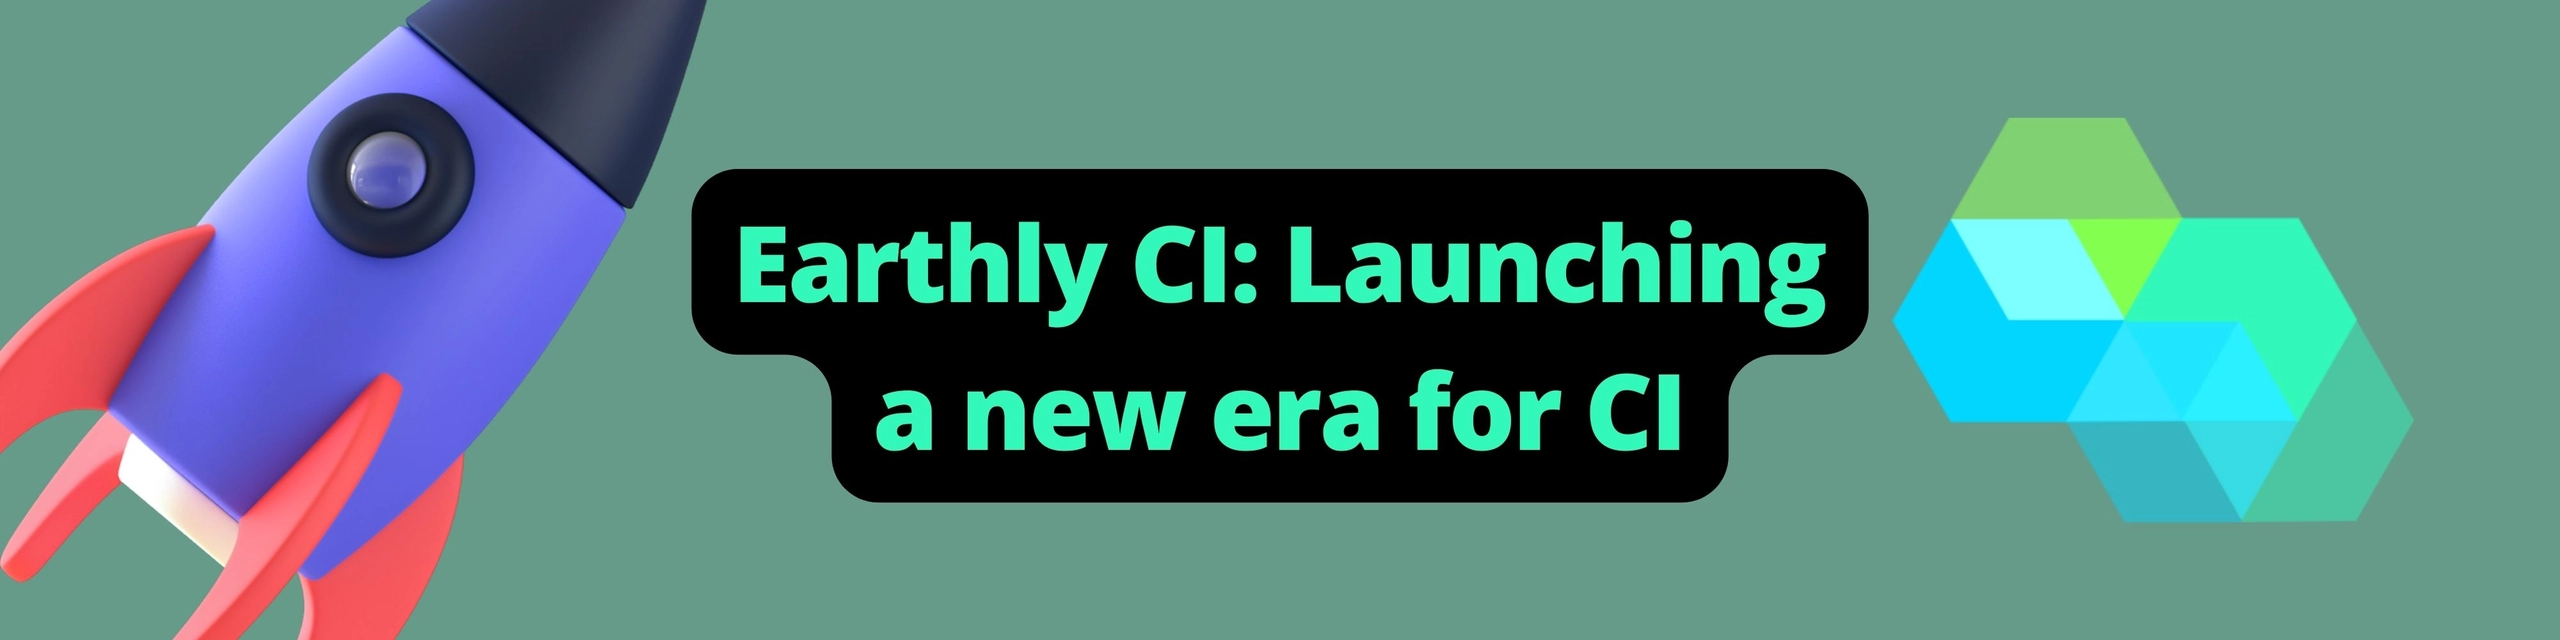 Earthly CI: Launching a new era for CI